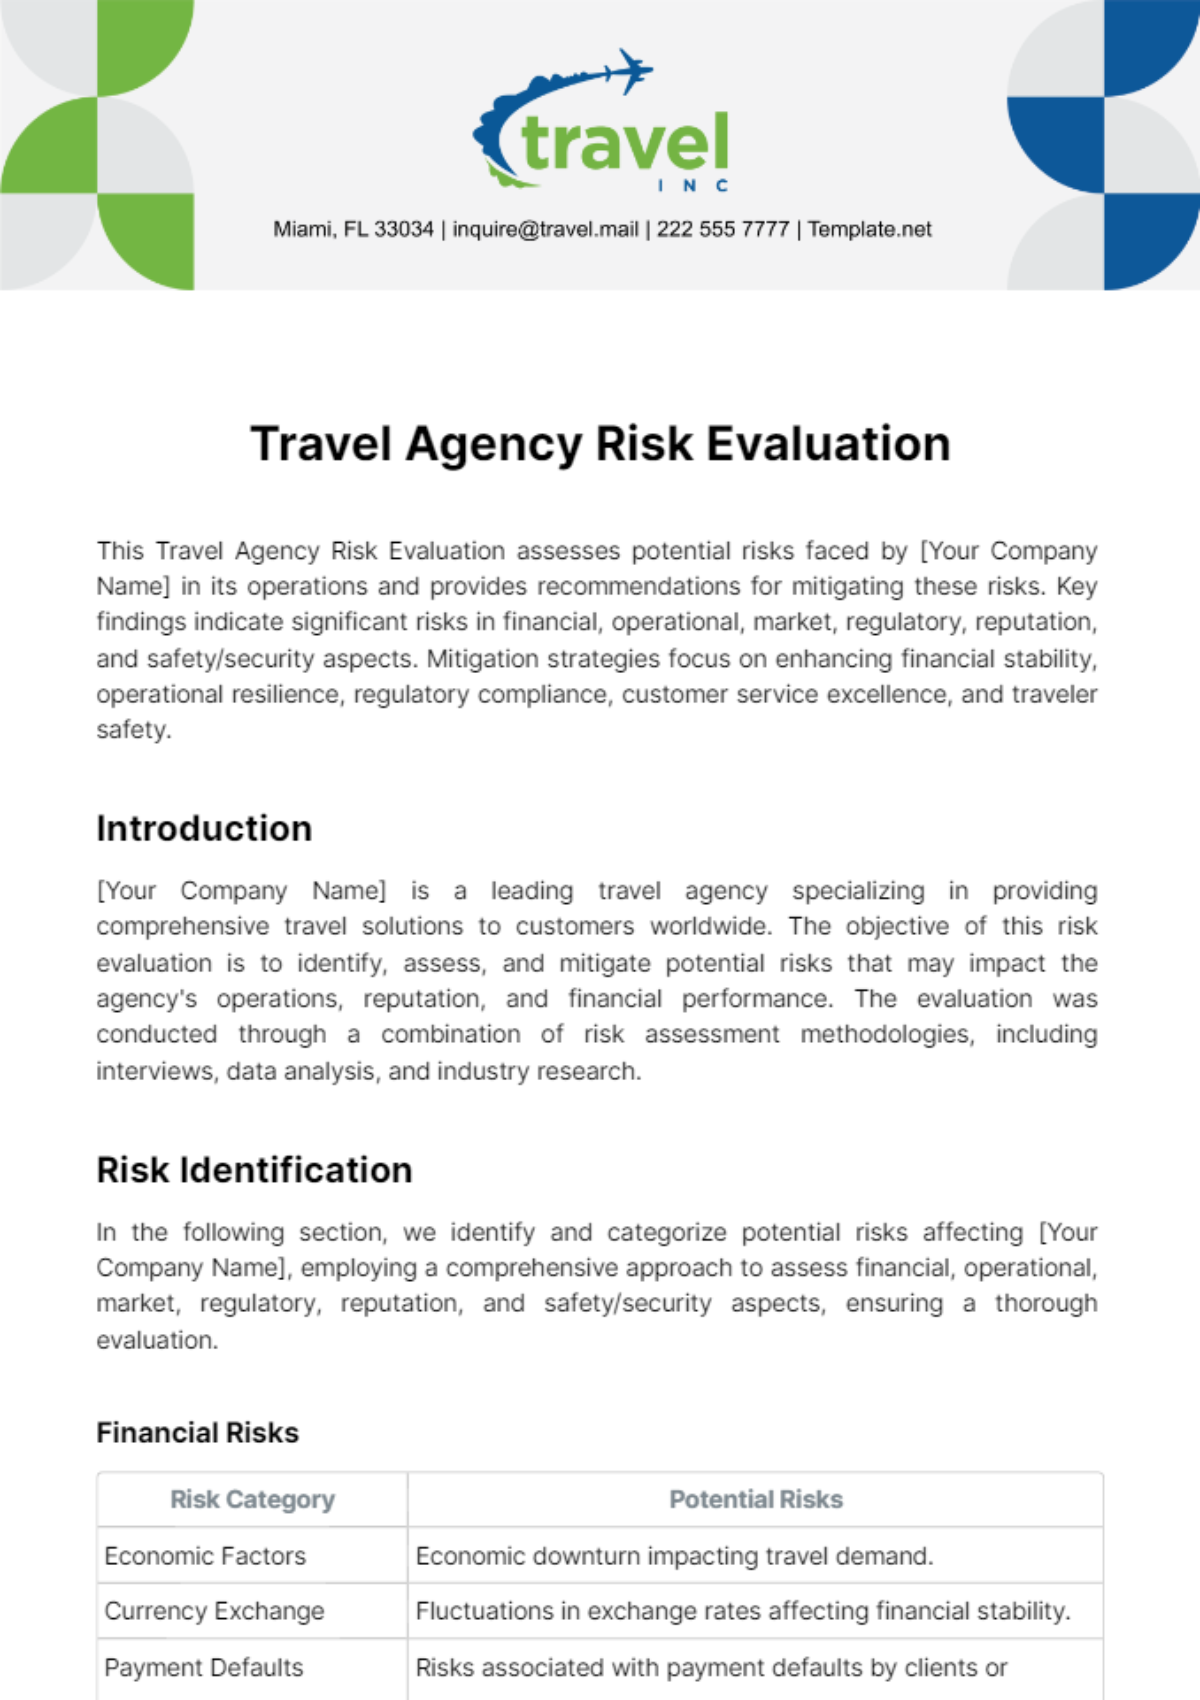 Travel Agency Risk Evaluation Template